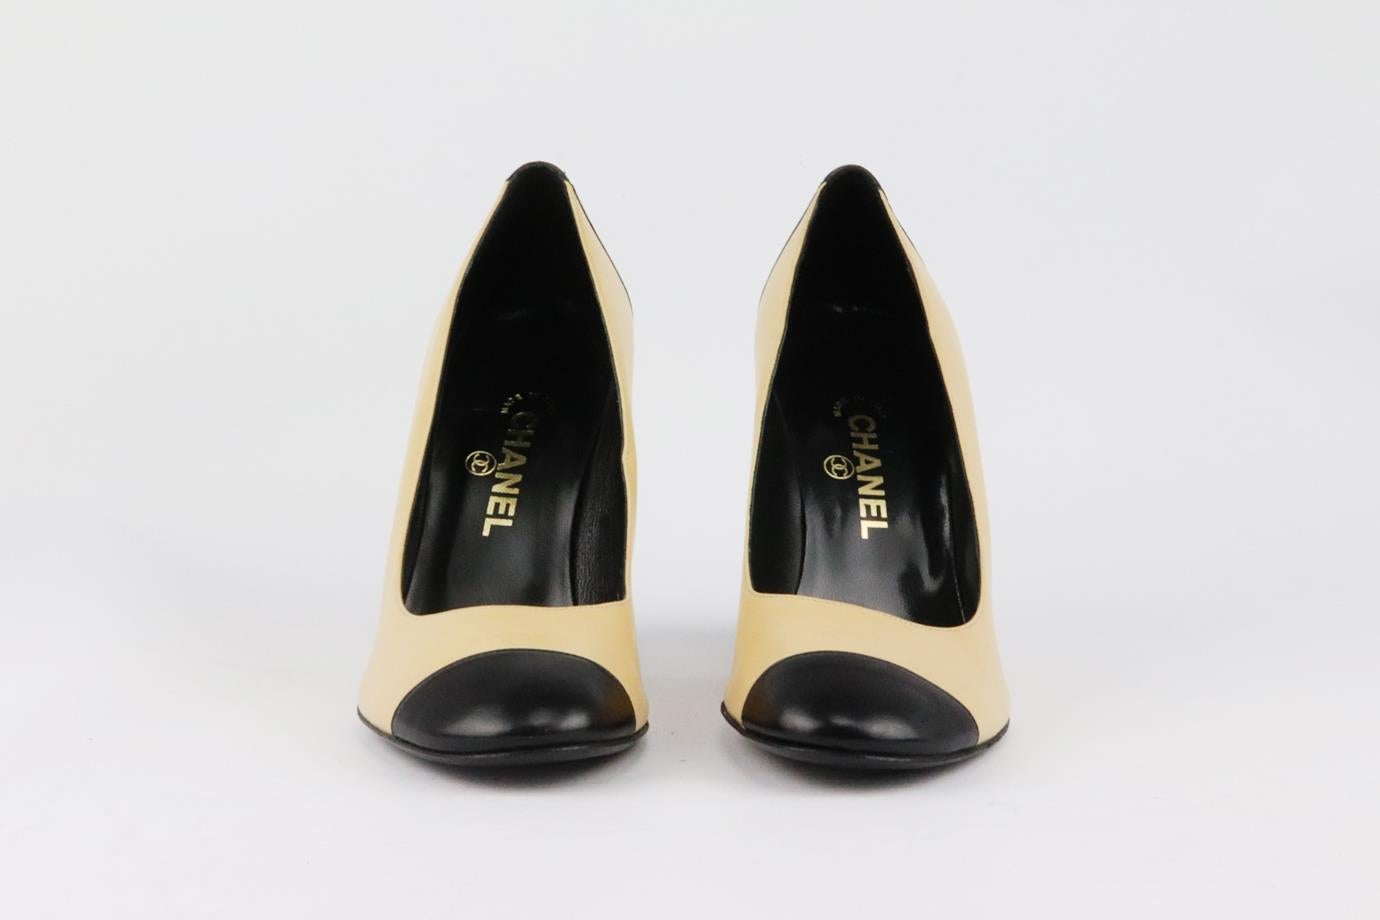 These pumps by Chanel have been made in Italy from beige and black leather, they're set on a block heel that's balanced with a rounded toe. Heel measures approximately 76 mm/ 3 inches. Black and beige leather. Slip on. Does not come with box or